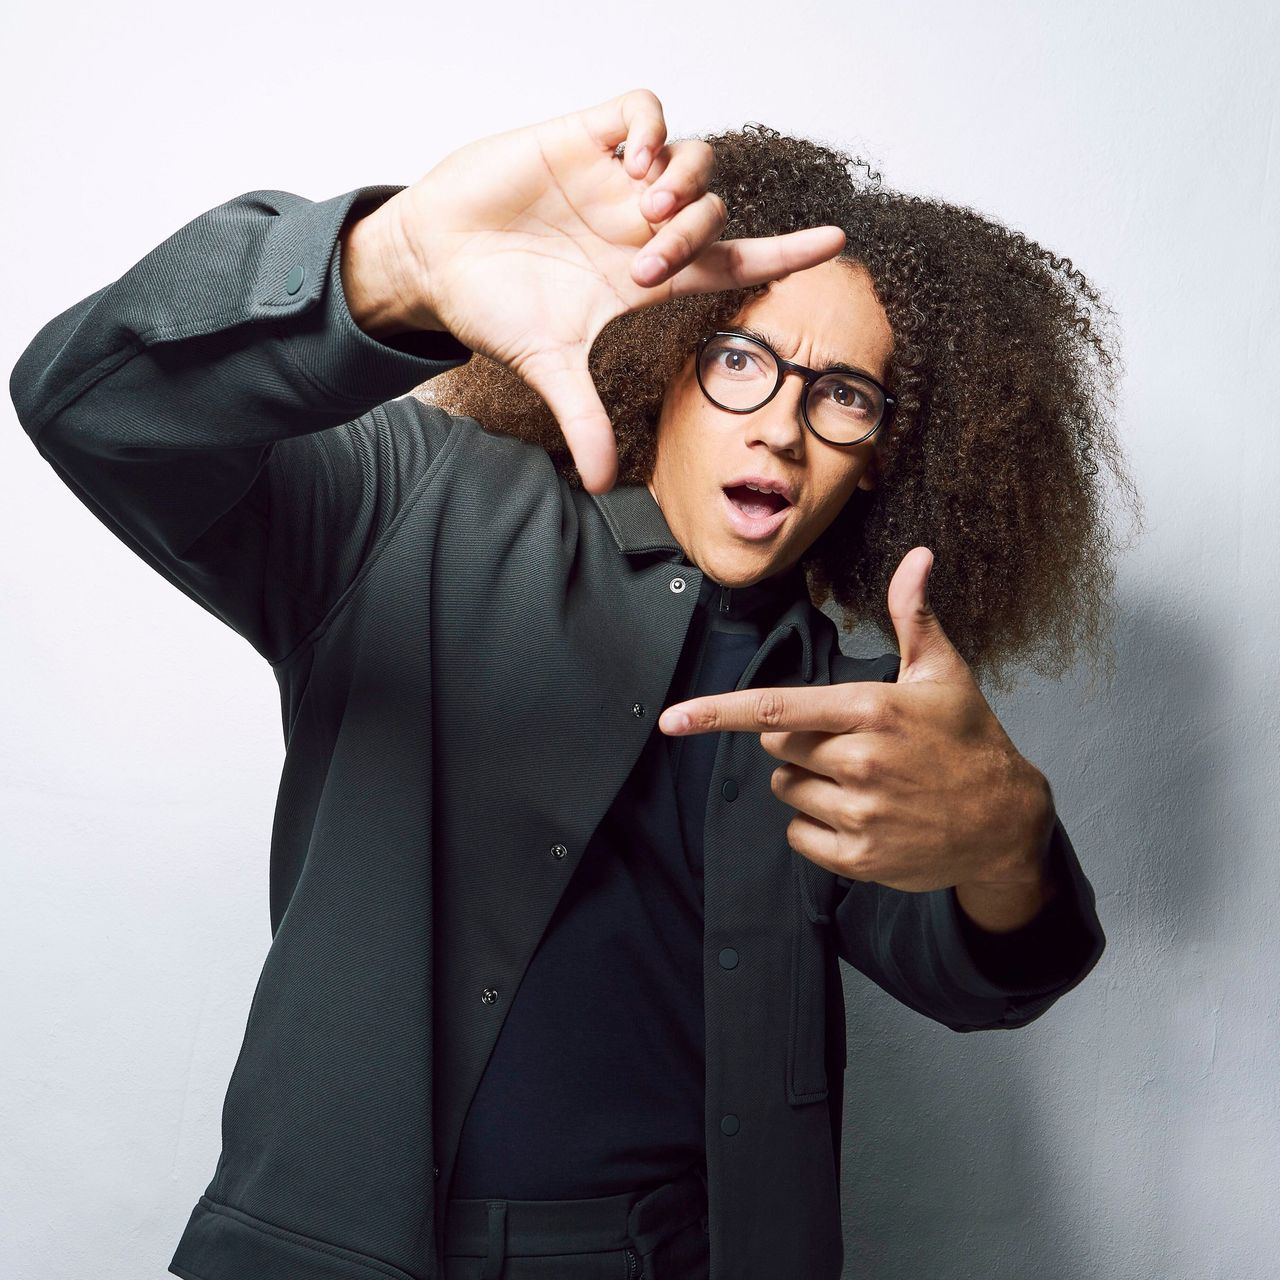 Perri Kiely pictured last year, in the lead-up to his Dancing On Ice debut